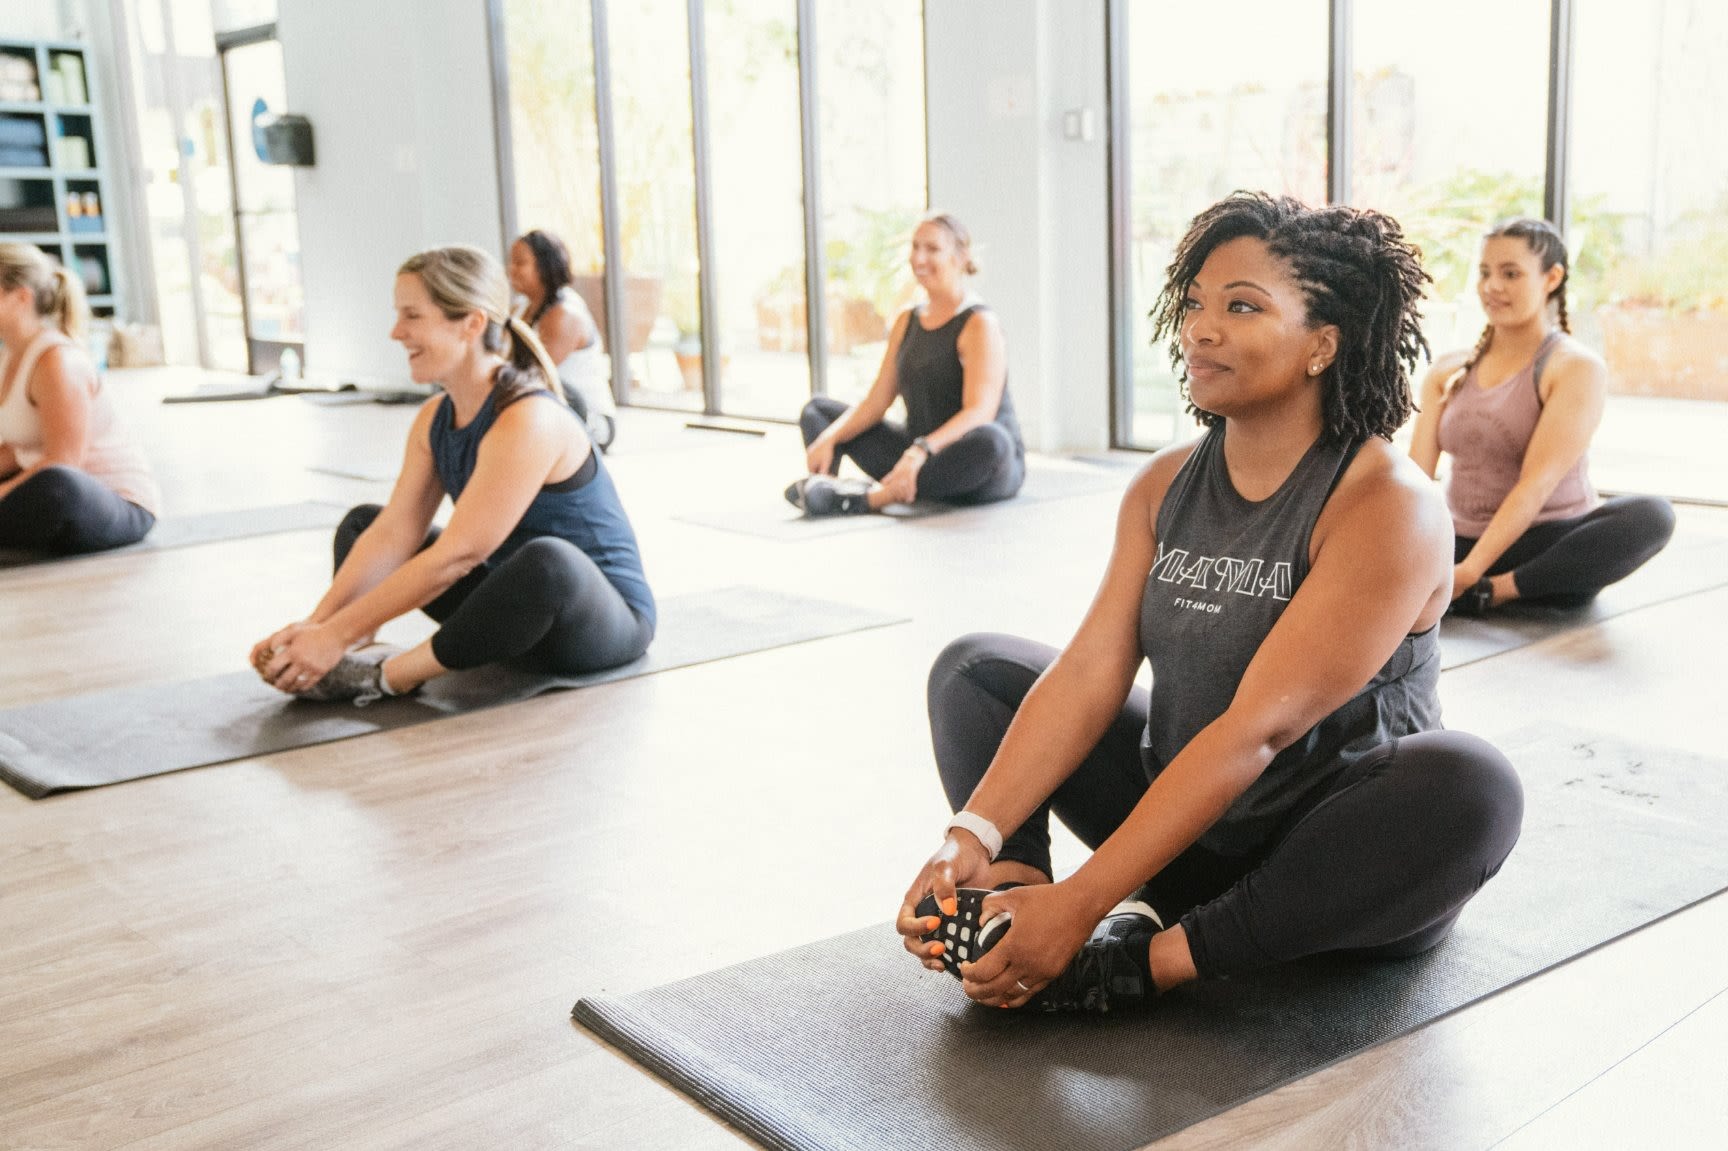 FIT4MOM - Eastside: Read Reviews and Book Classes on ClassPass